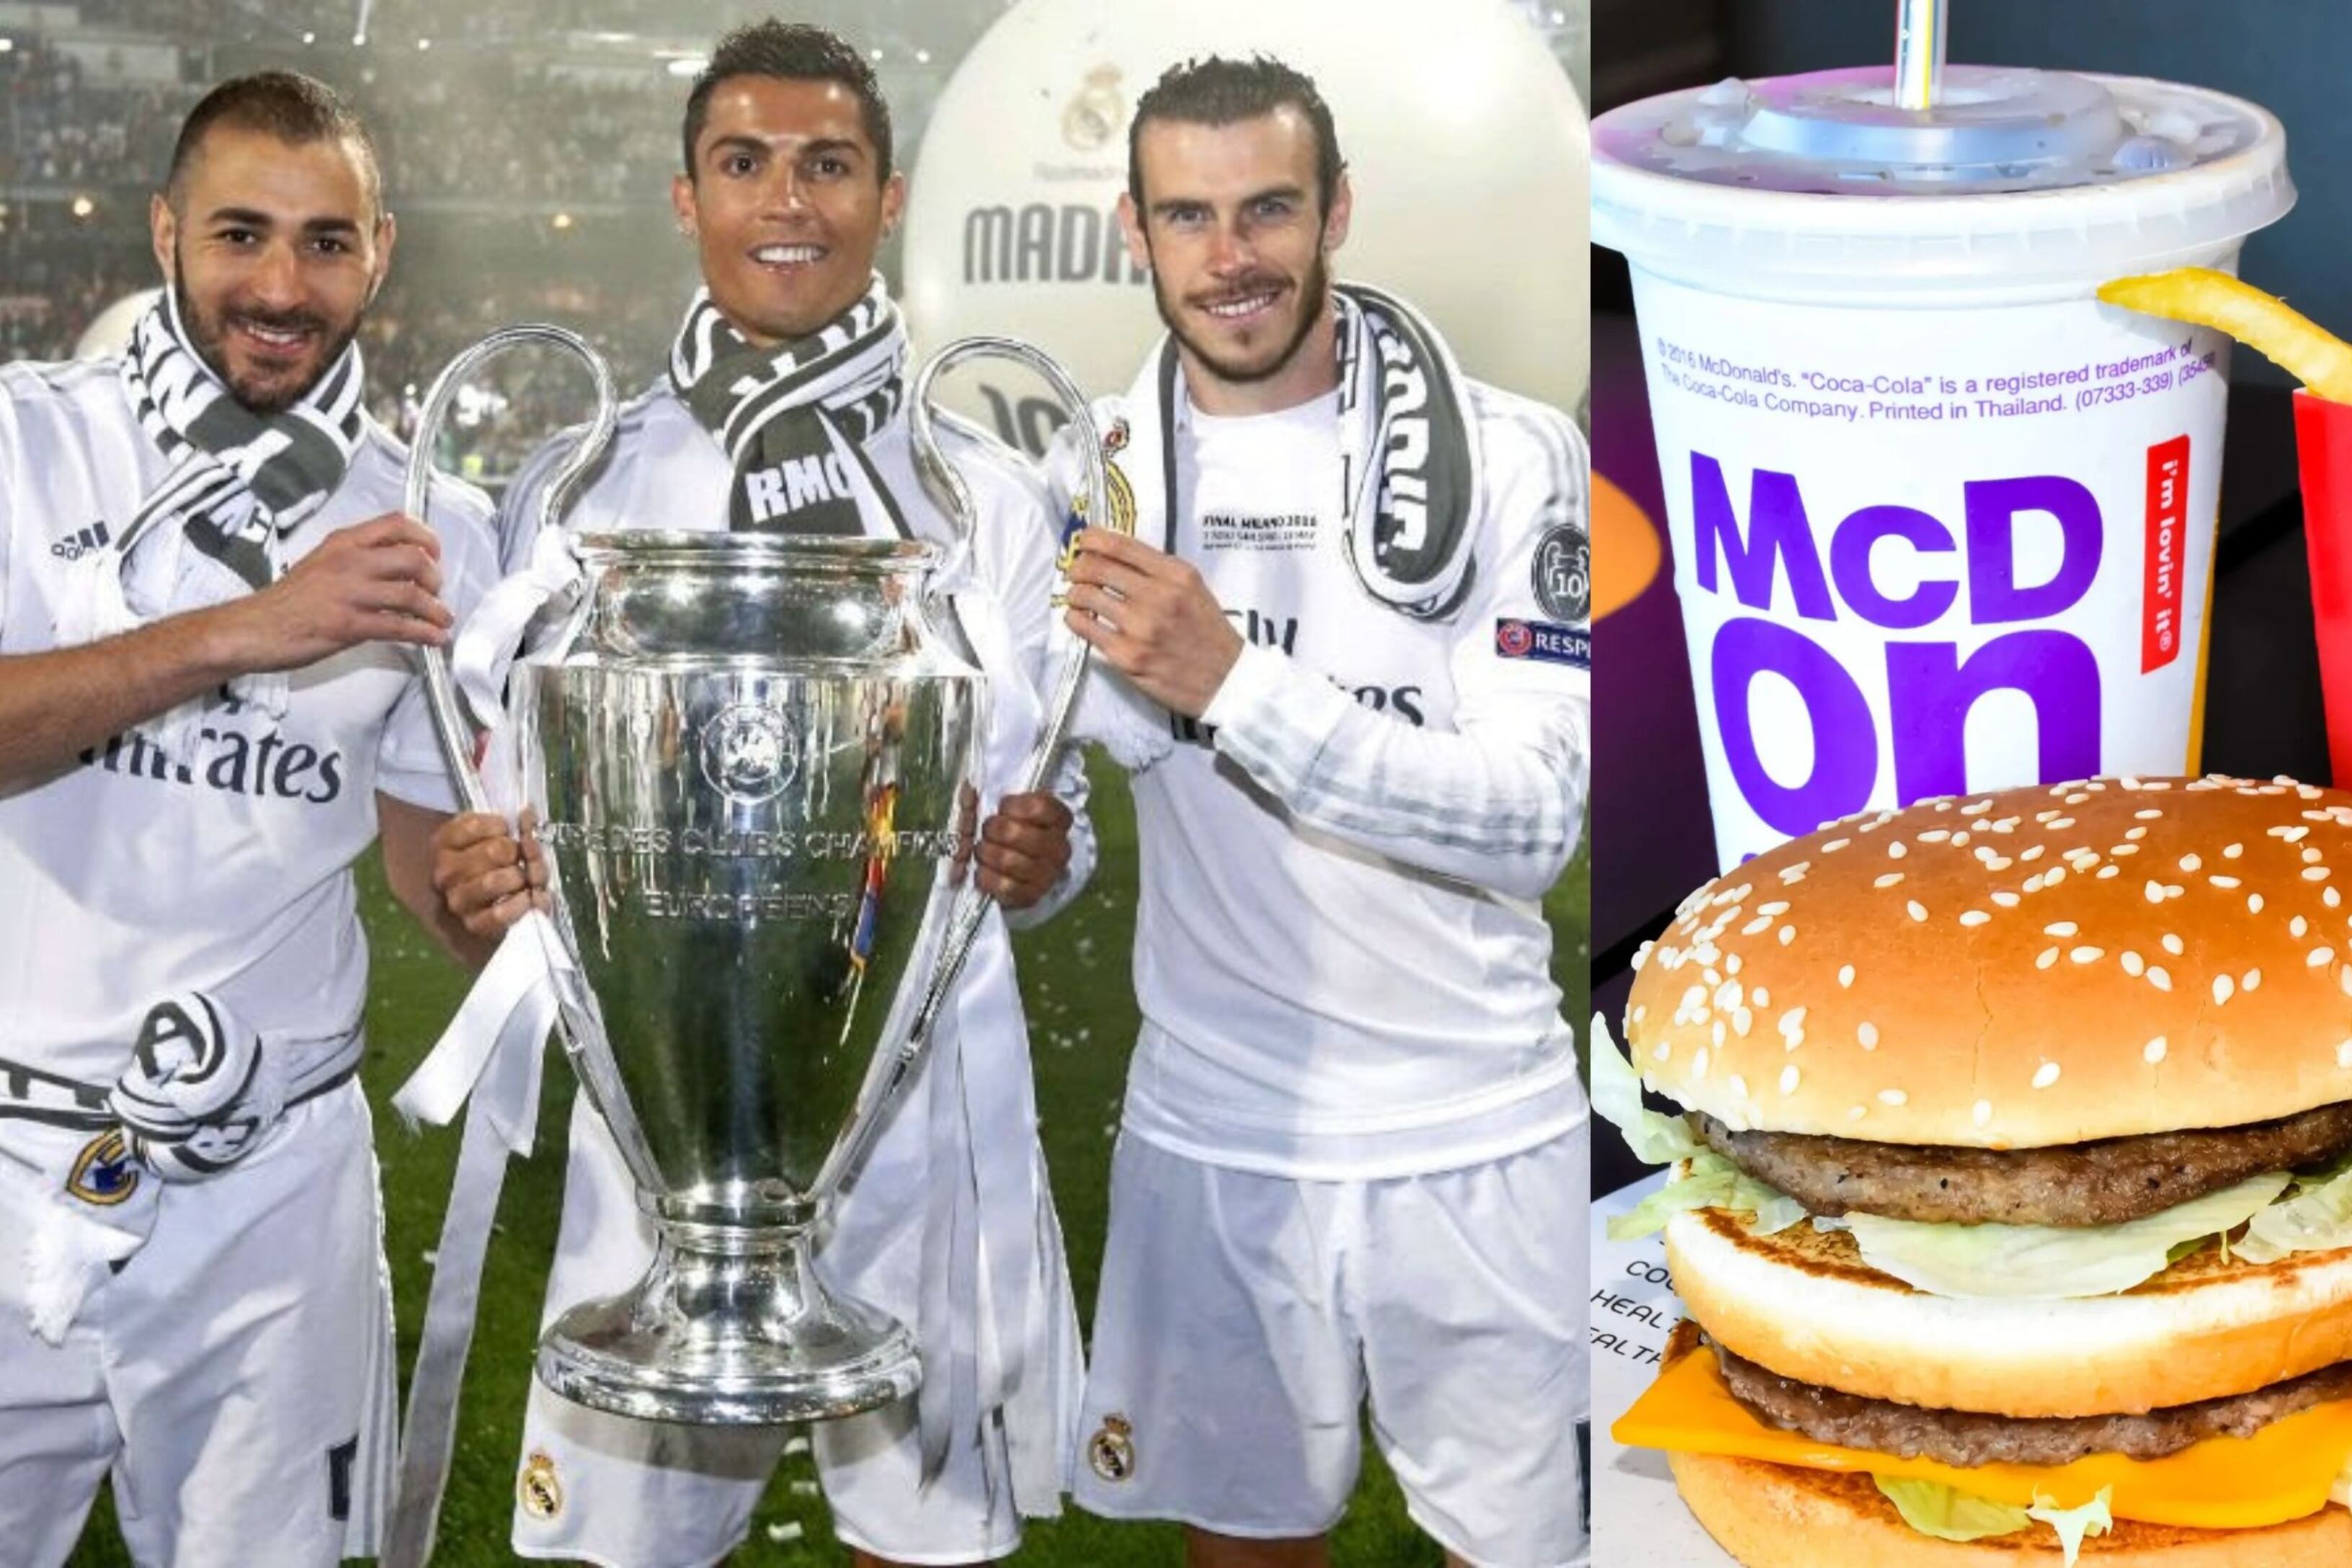 He won 5 Champions League with Cristiano Ronaldo, now he sells hamburgers for a living